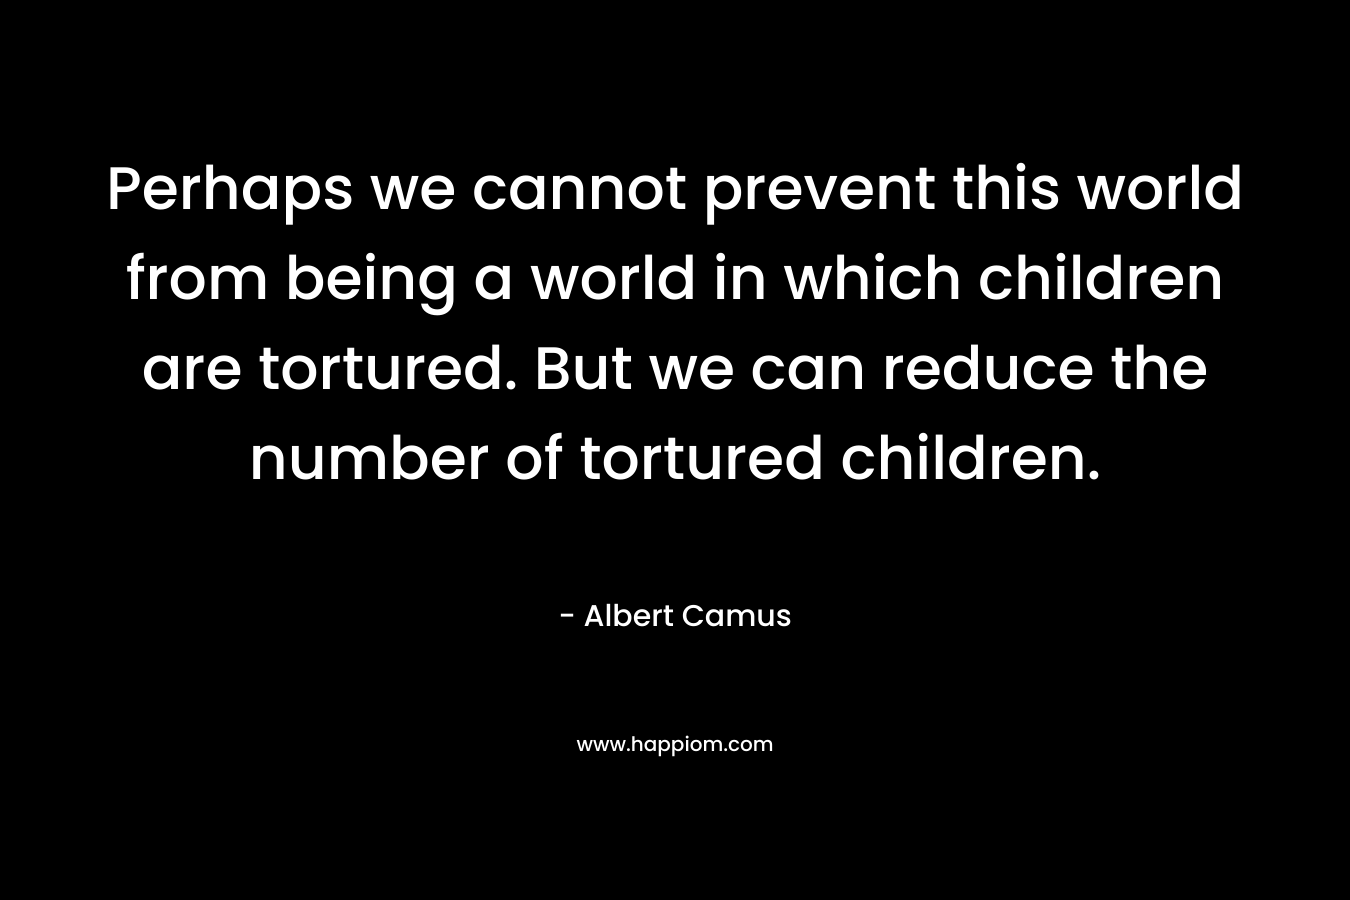 Perhaps we cannot prevent this world from being a world in which children are tortured. But we can reduce the number of tortured children. – Albert Camus